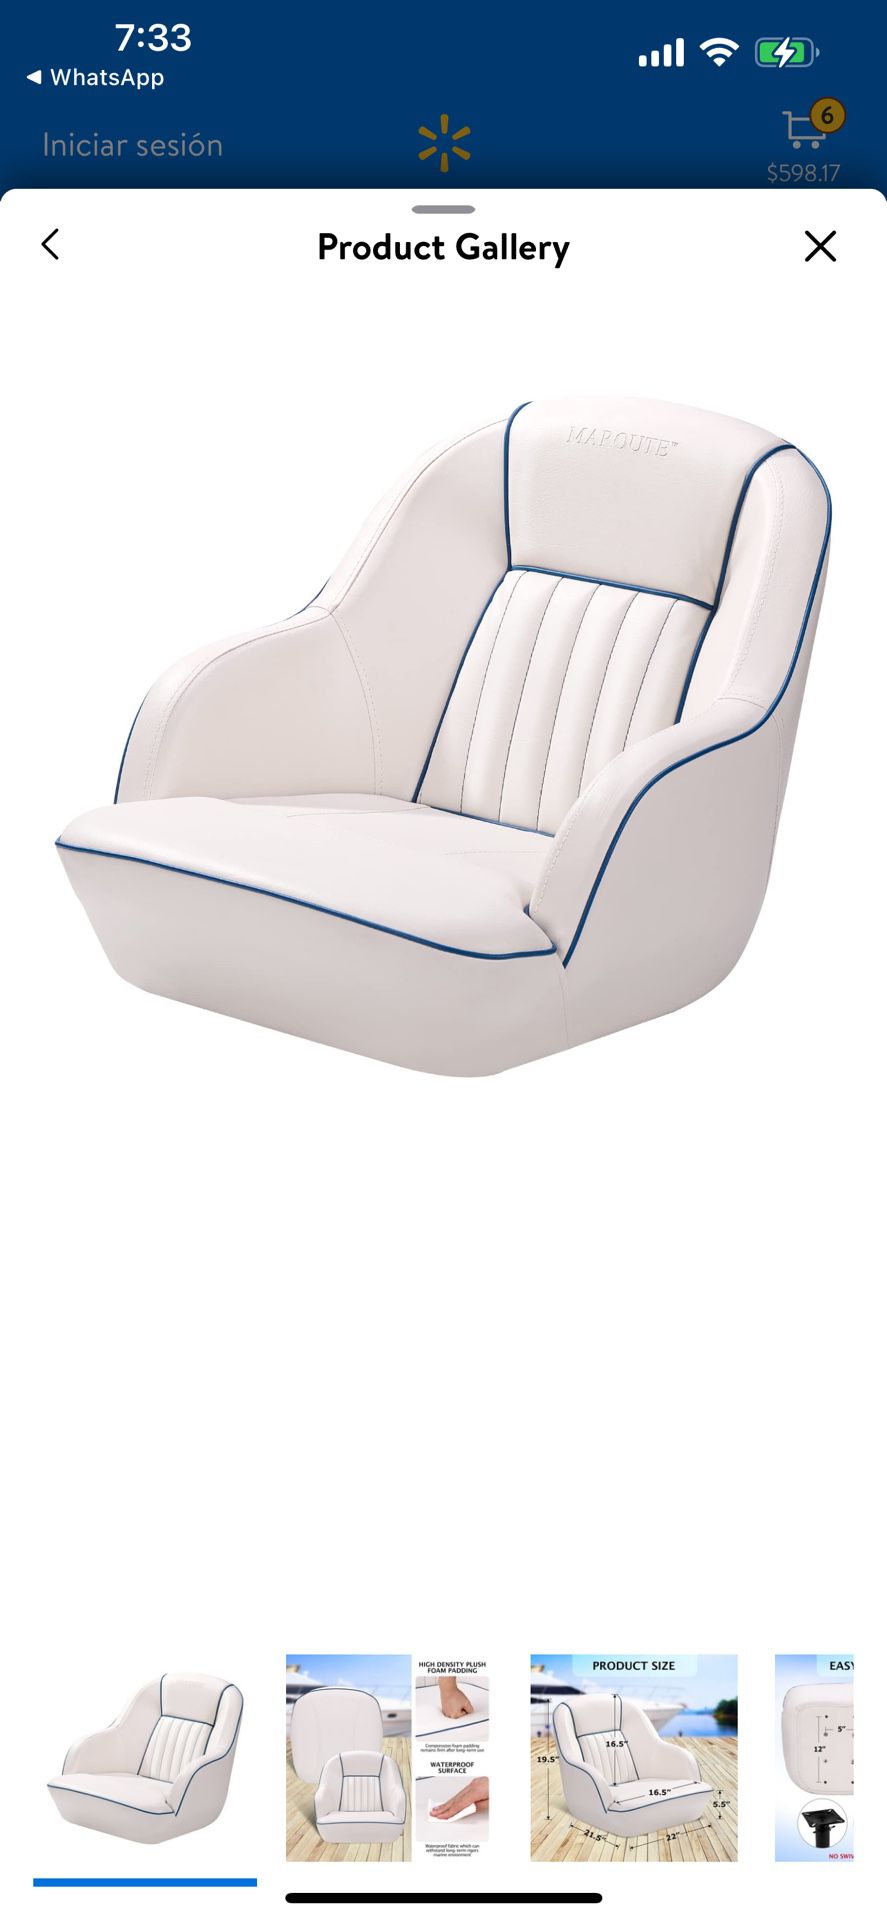 HA-EMORE Pontoon Boat Seat Captains Bucket Seat with Boat Seat Cover White 